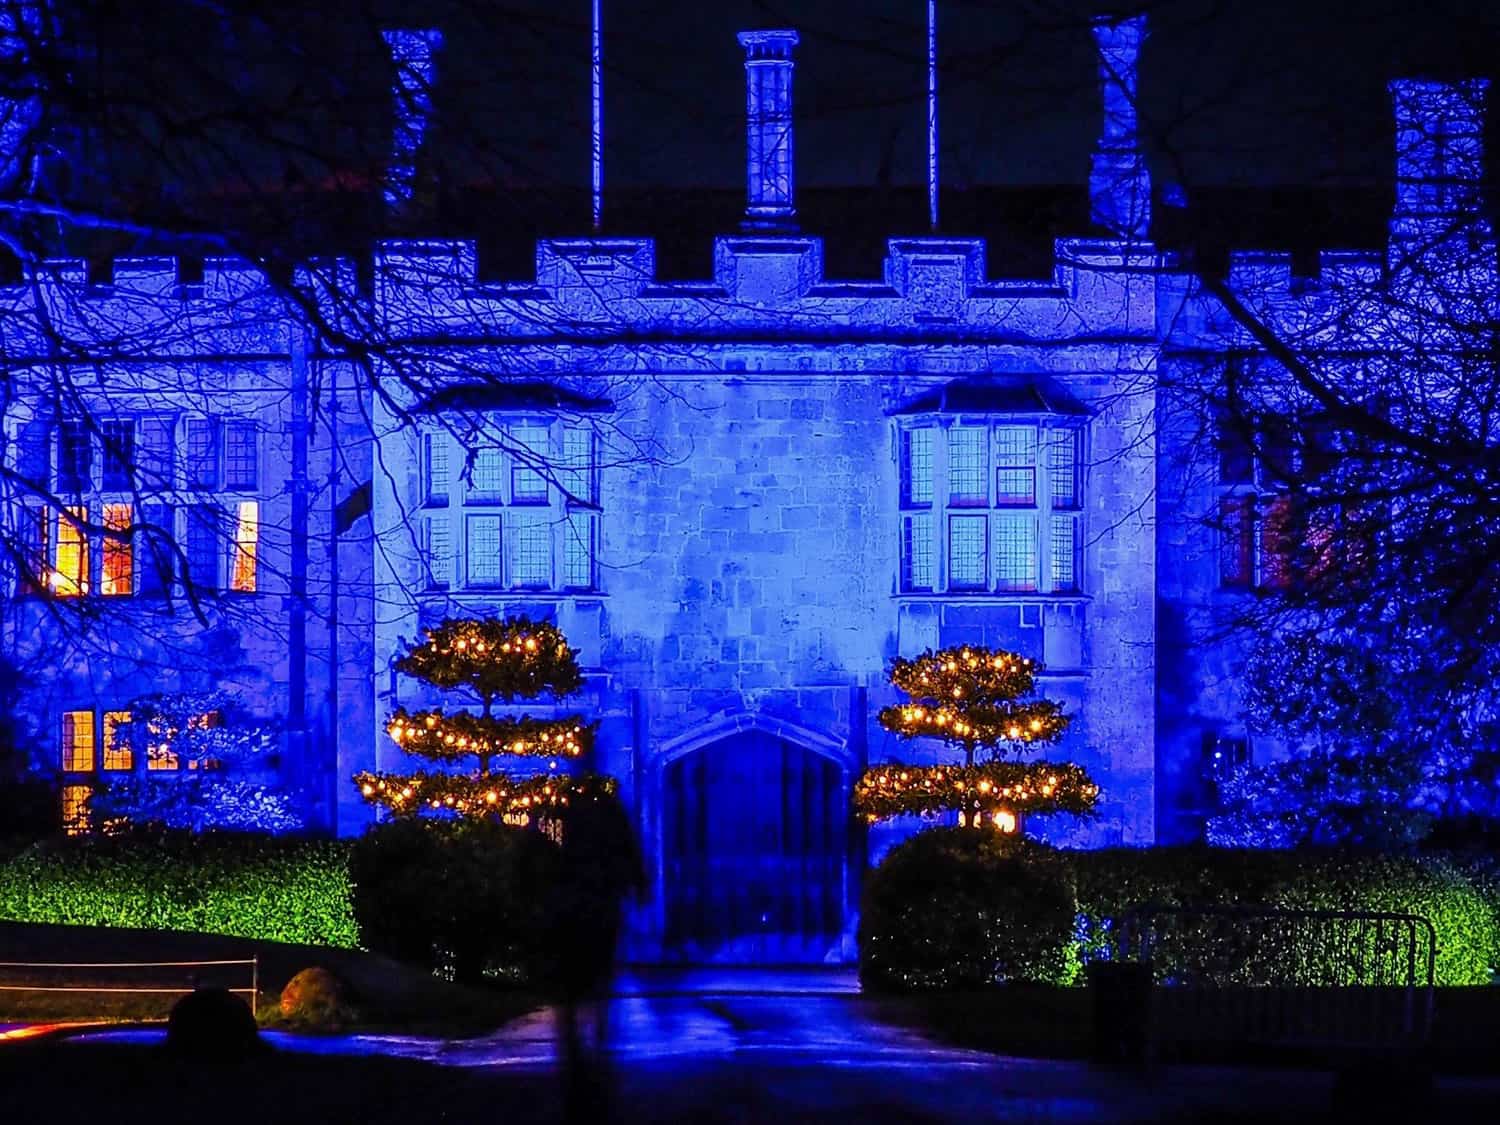 2017 Sudeley Castle Spectacle of Light Photo Gallery 15